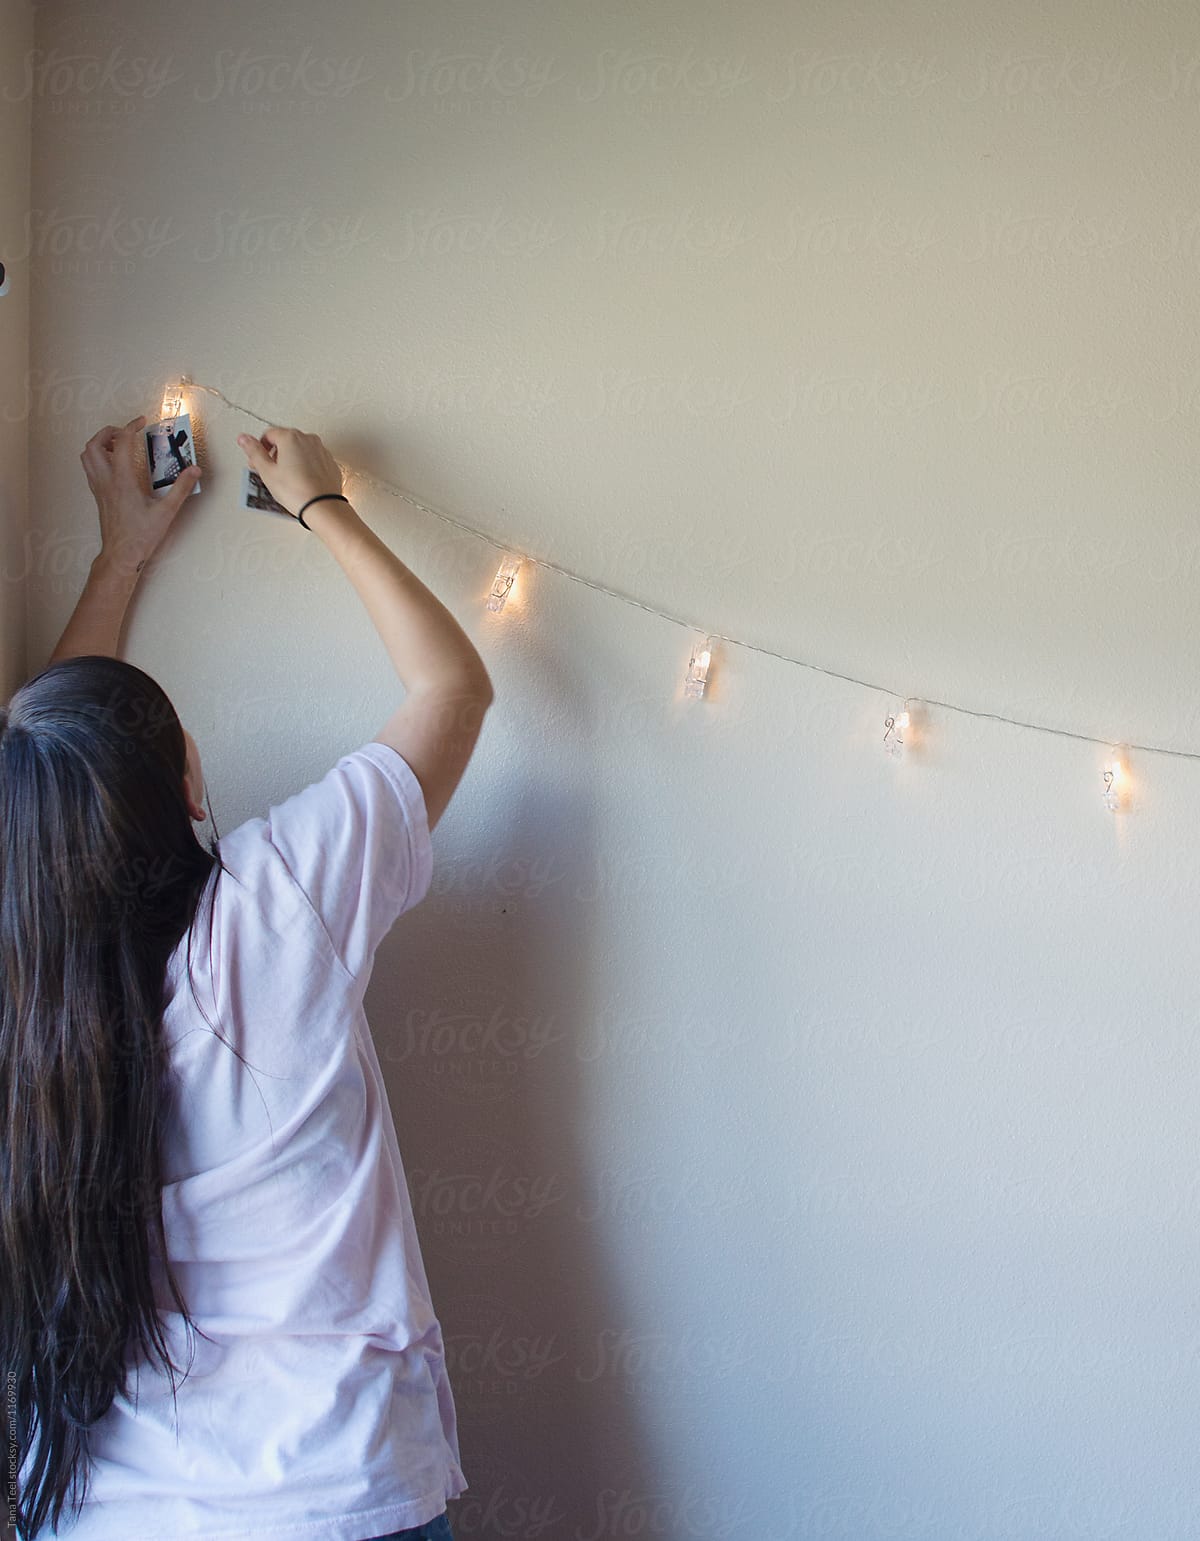 teenager hangs pictures on lighted string